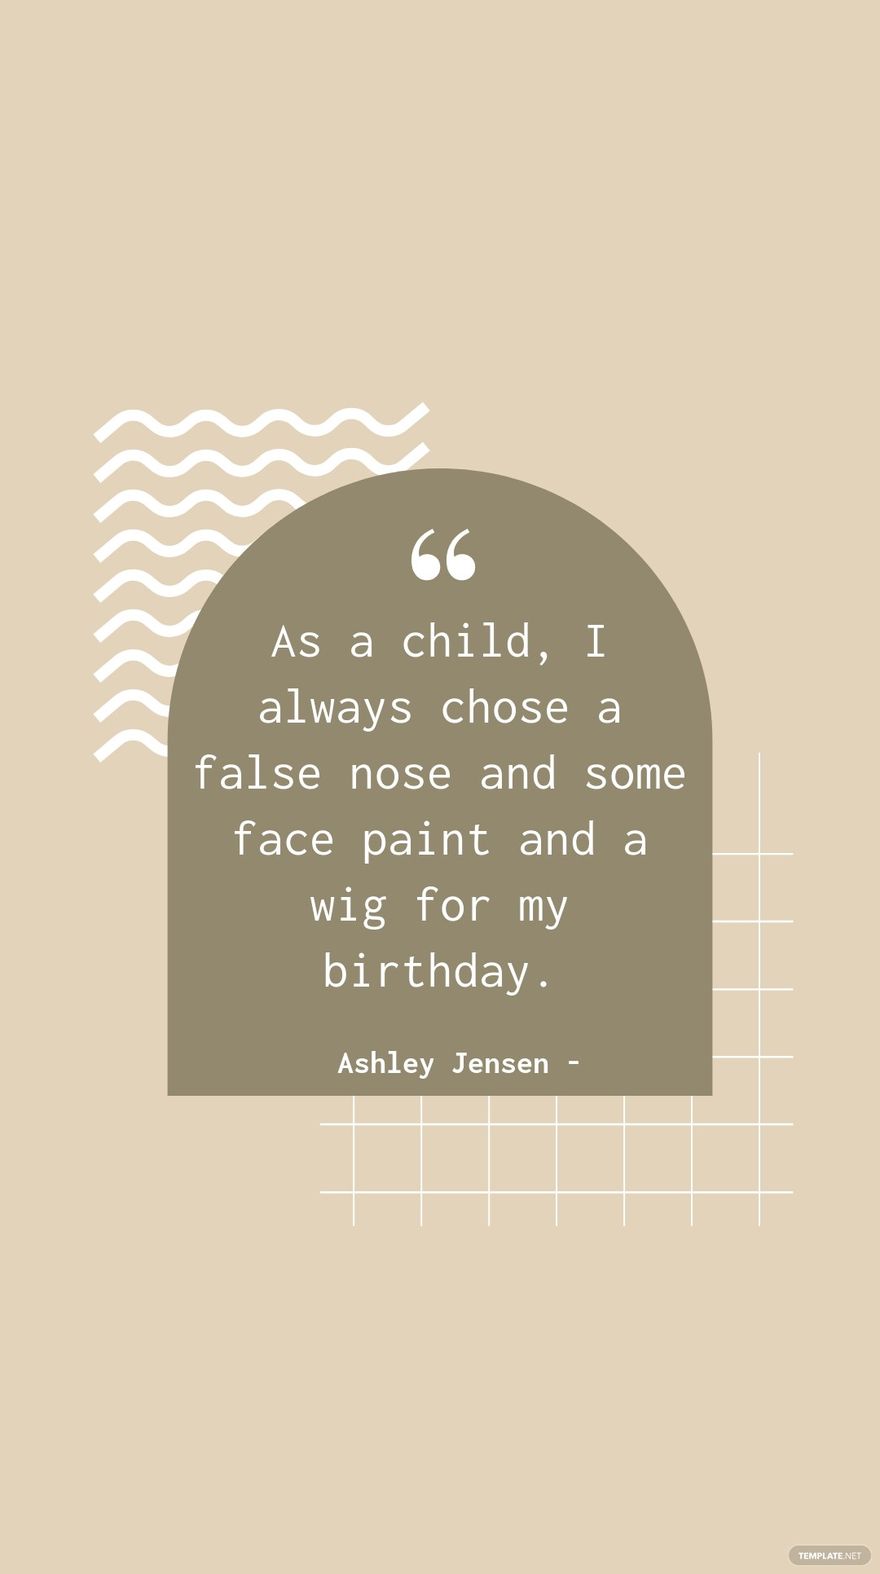 Ashley Jensen - As a child, I always chose a false nose and some face paint and a wig for my birthday.